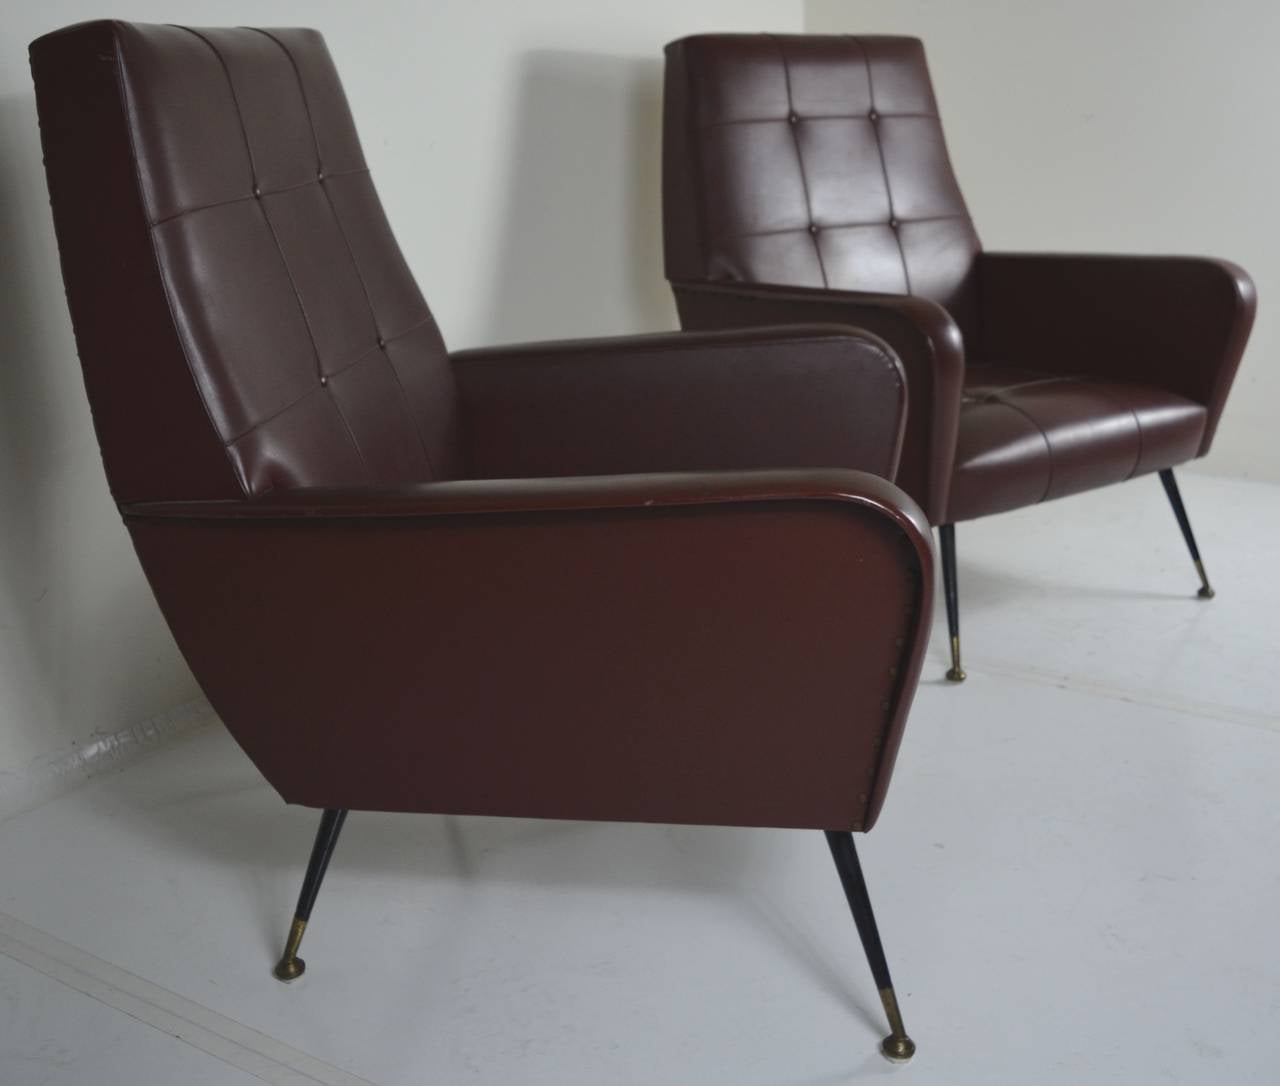 Pair of Masculine, Italian Armchairs in original tufted naugahyde, circa 1960s. Lacquer and brass pronounced legs and straight forward simple lines make these chairs perfect for a MadMen office or lounge! Original upholstery in very good condition